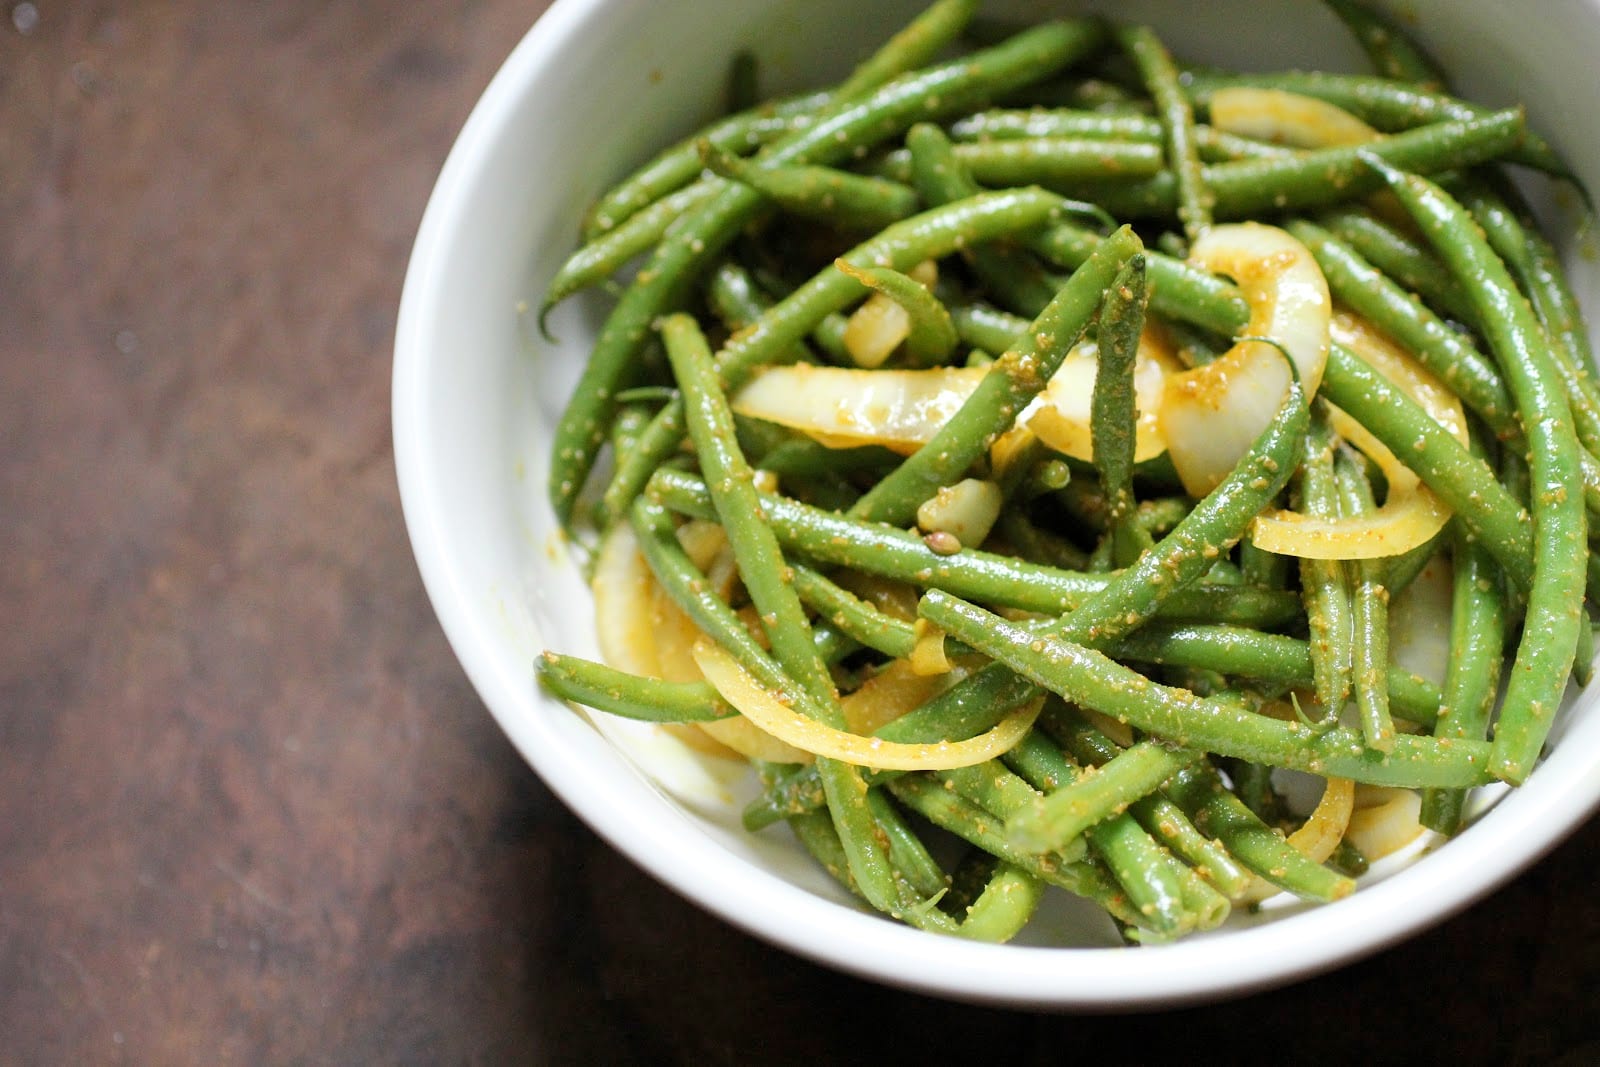 Spicy Pickled String Beans